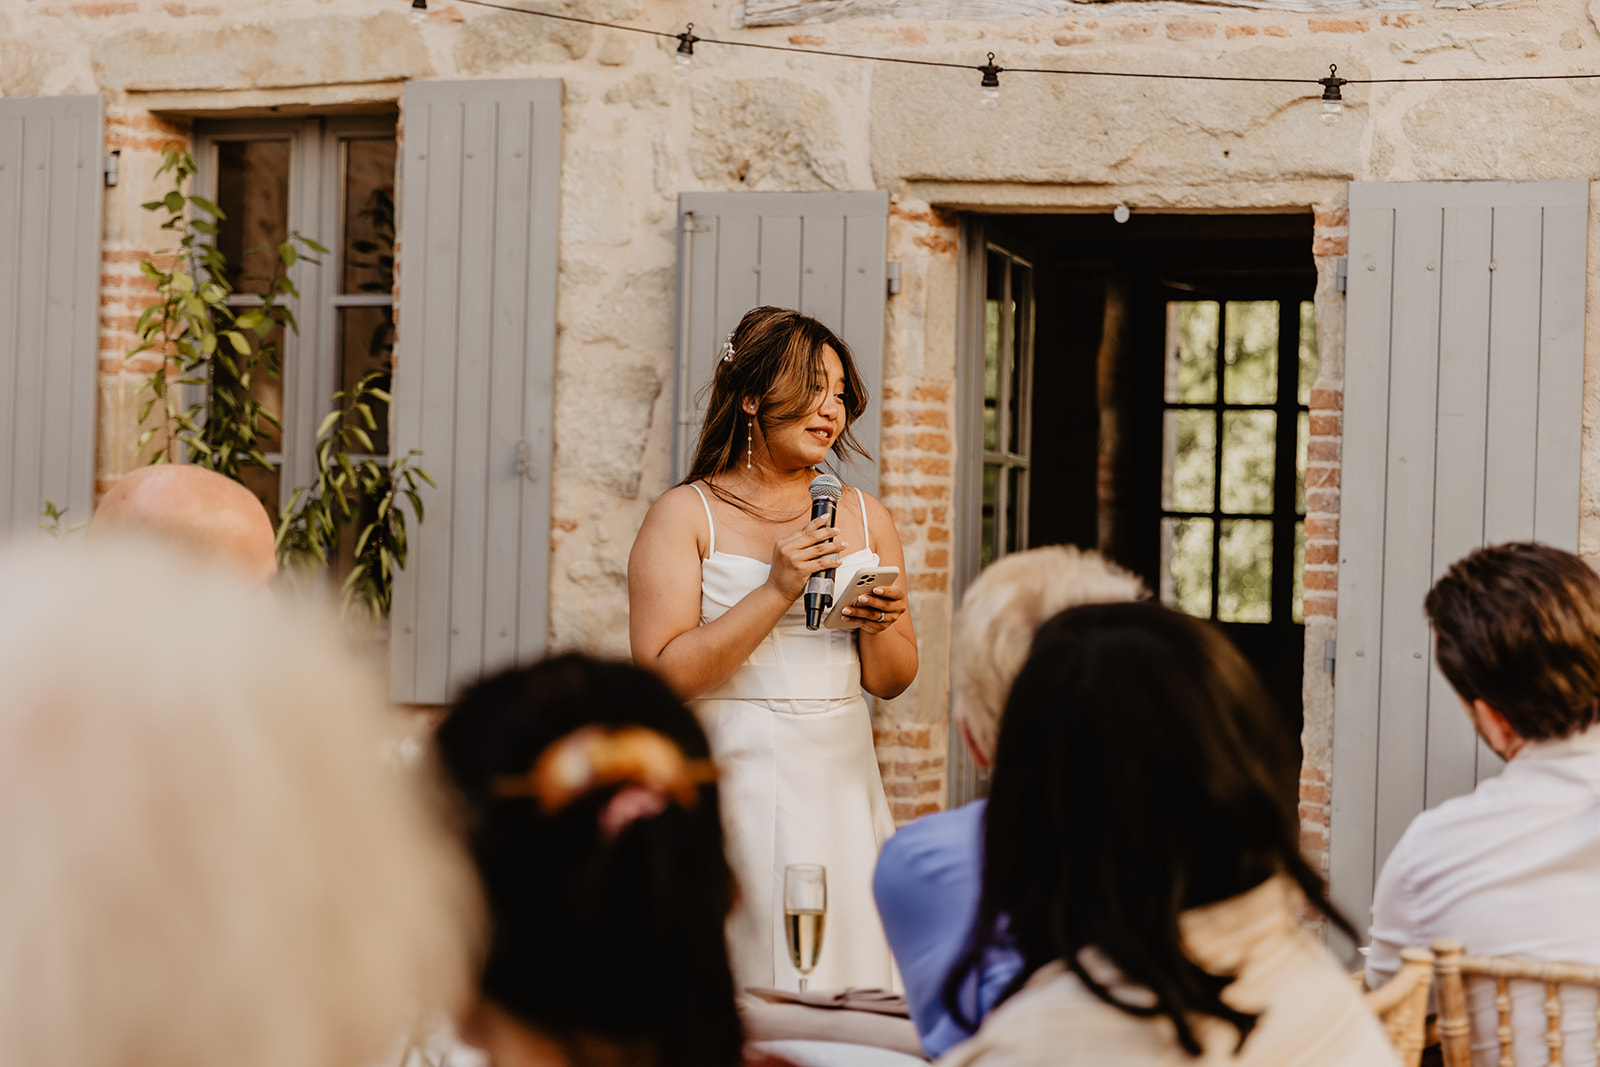 Speeches at reception at a France Destination Wedding. Photography and Videography by Olive Joy Photography